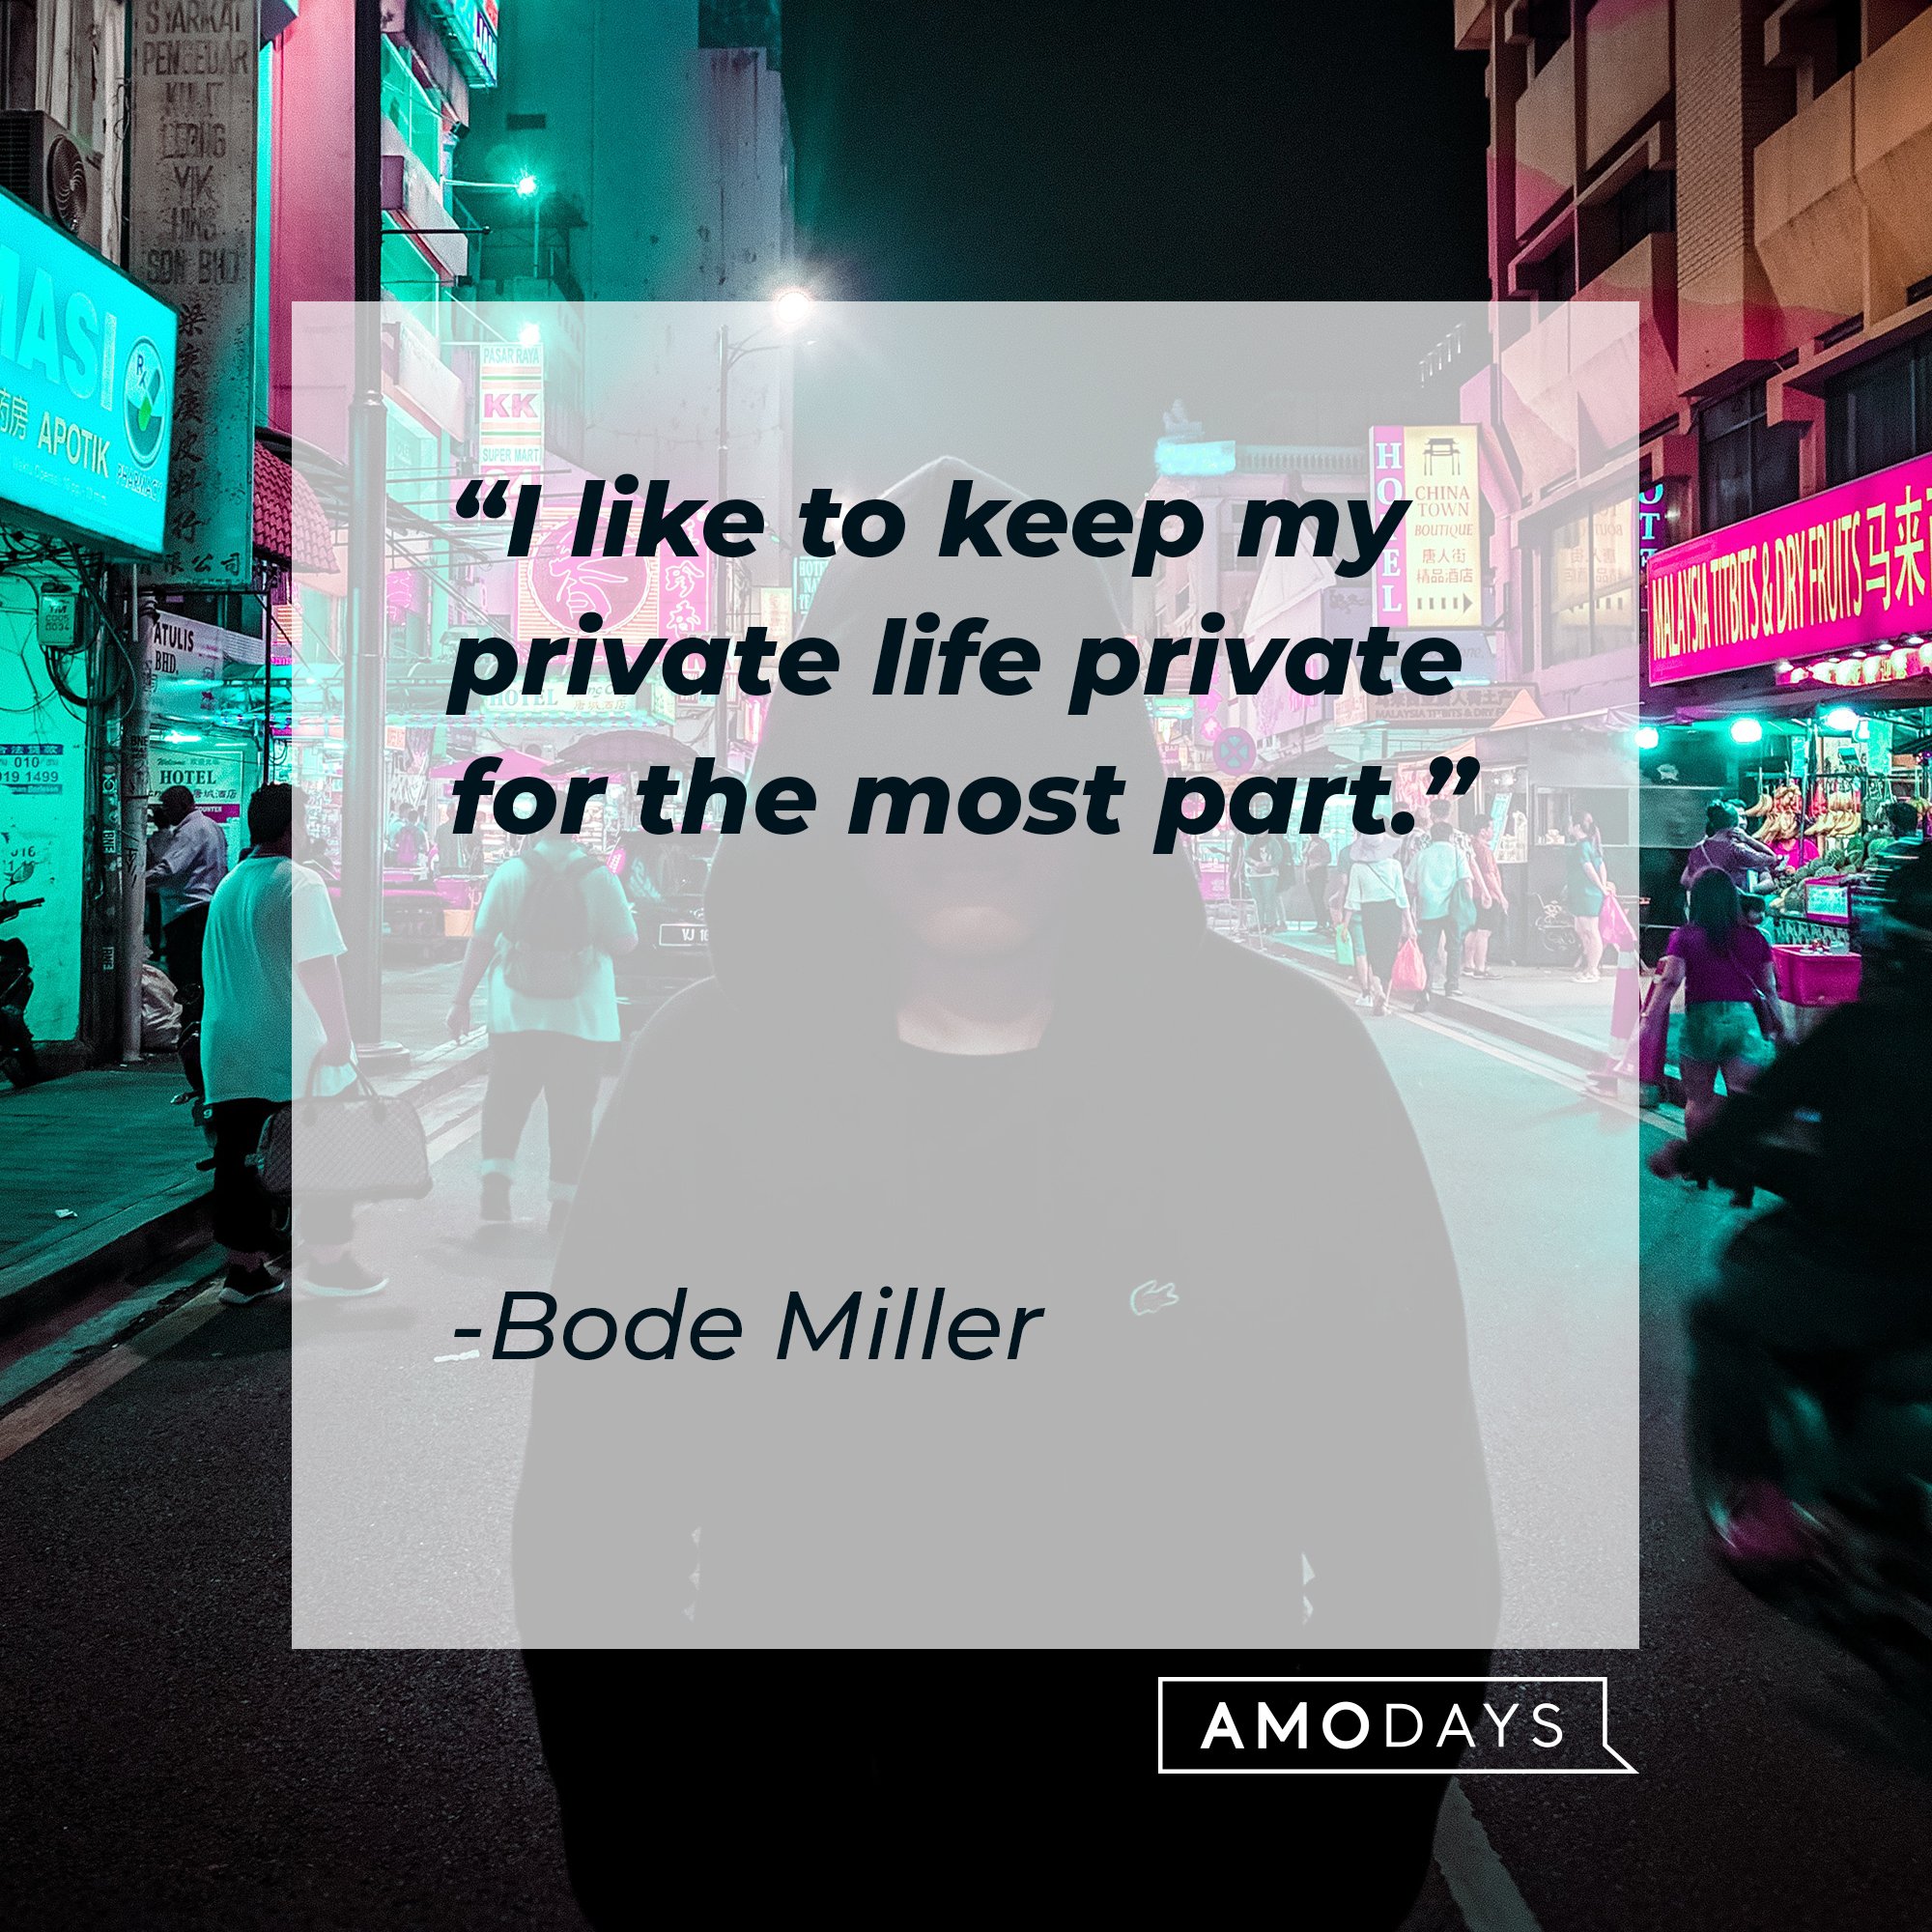 Bode Miller’s quote: "I like to keep my private life private for the most part." | Image: AmoDays  